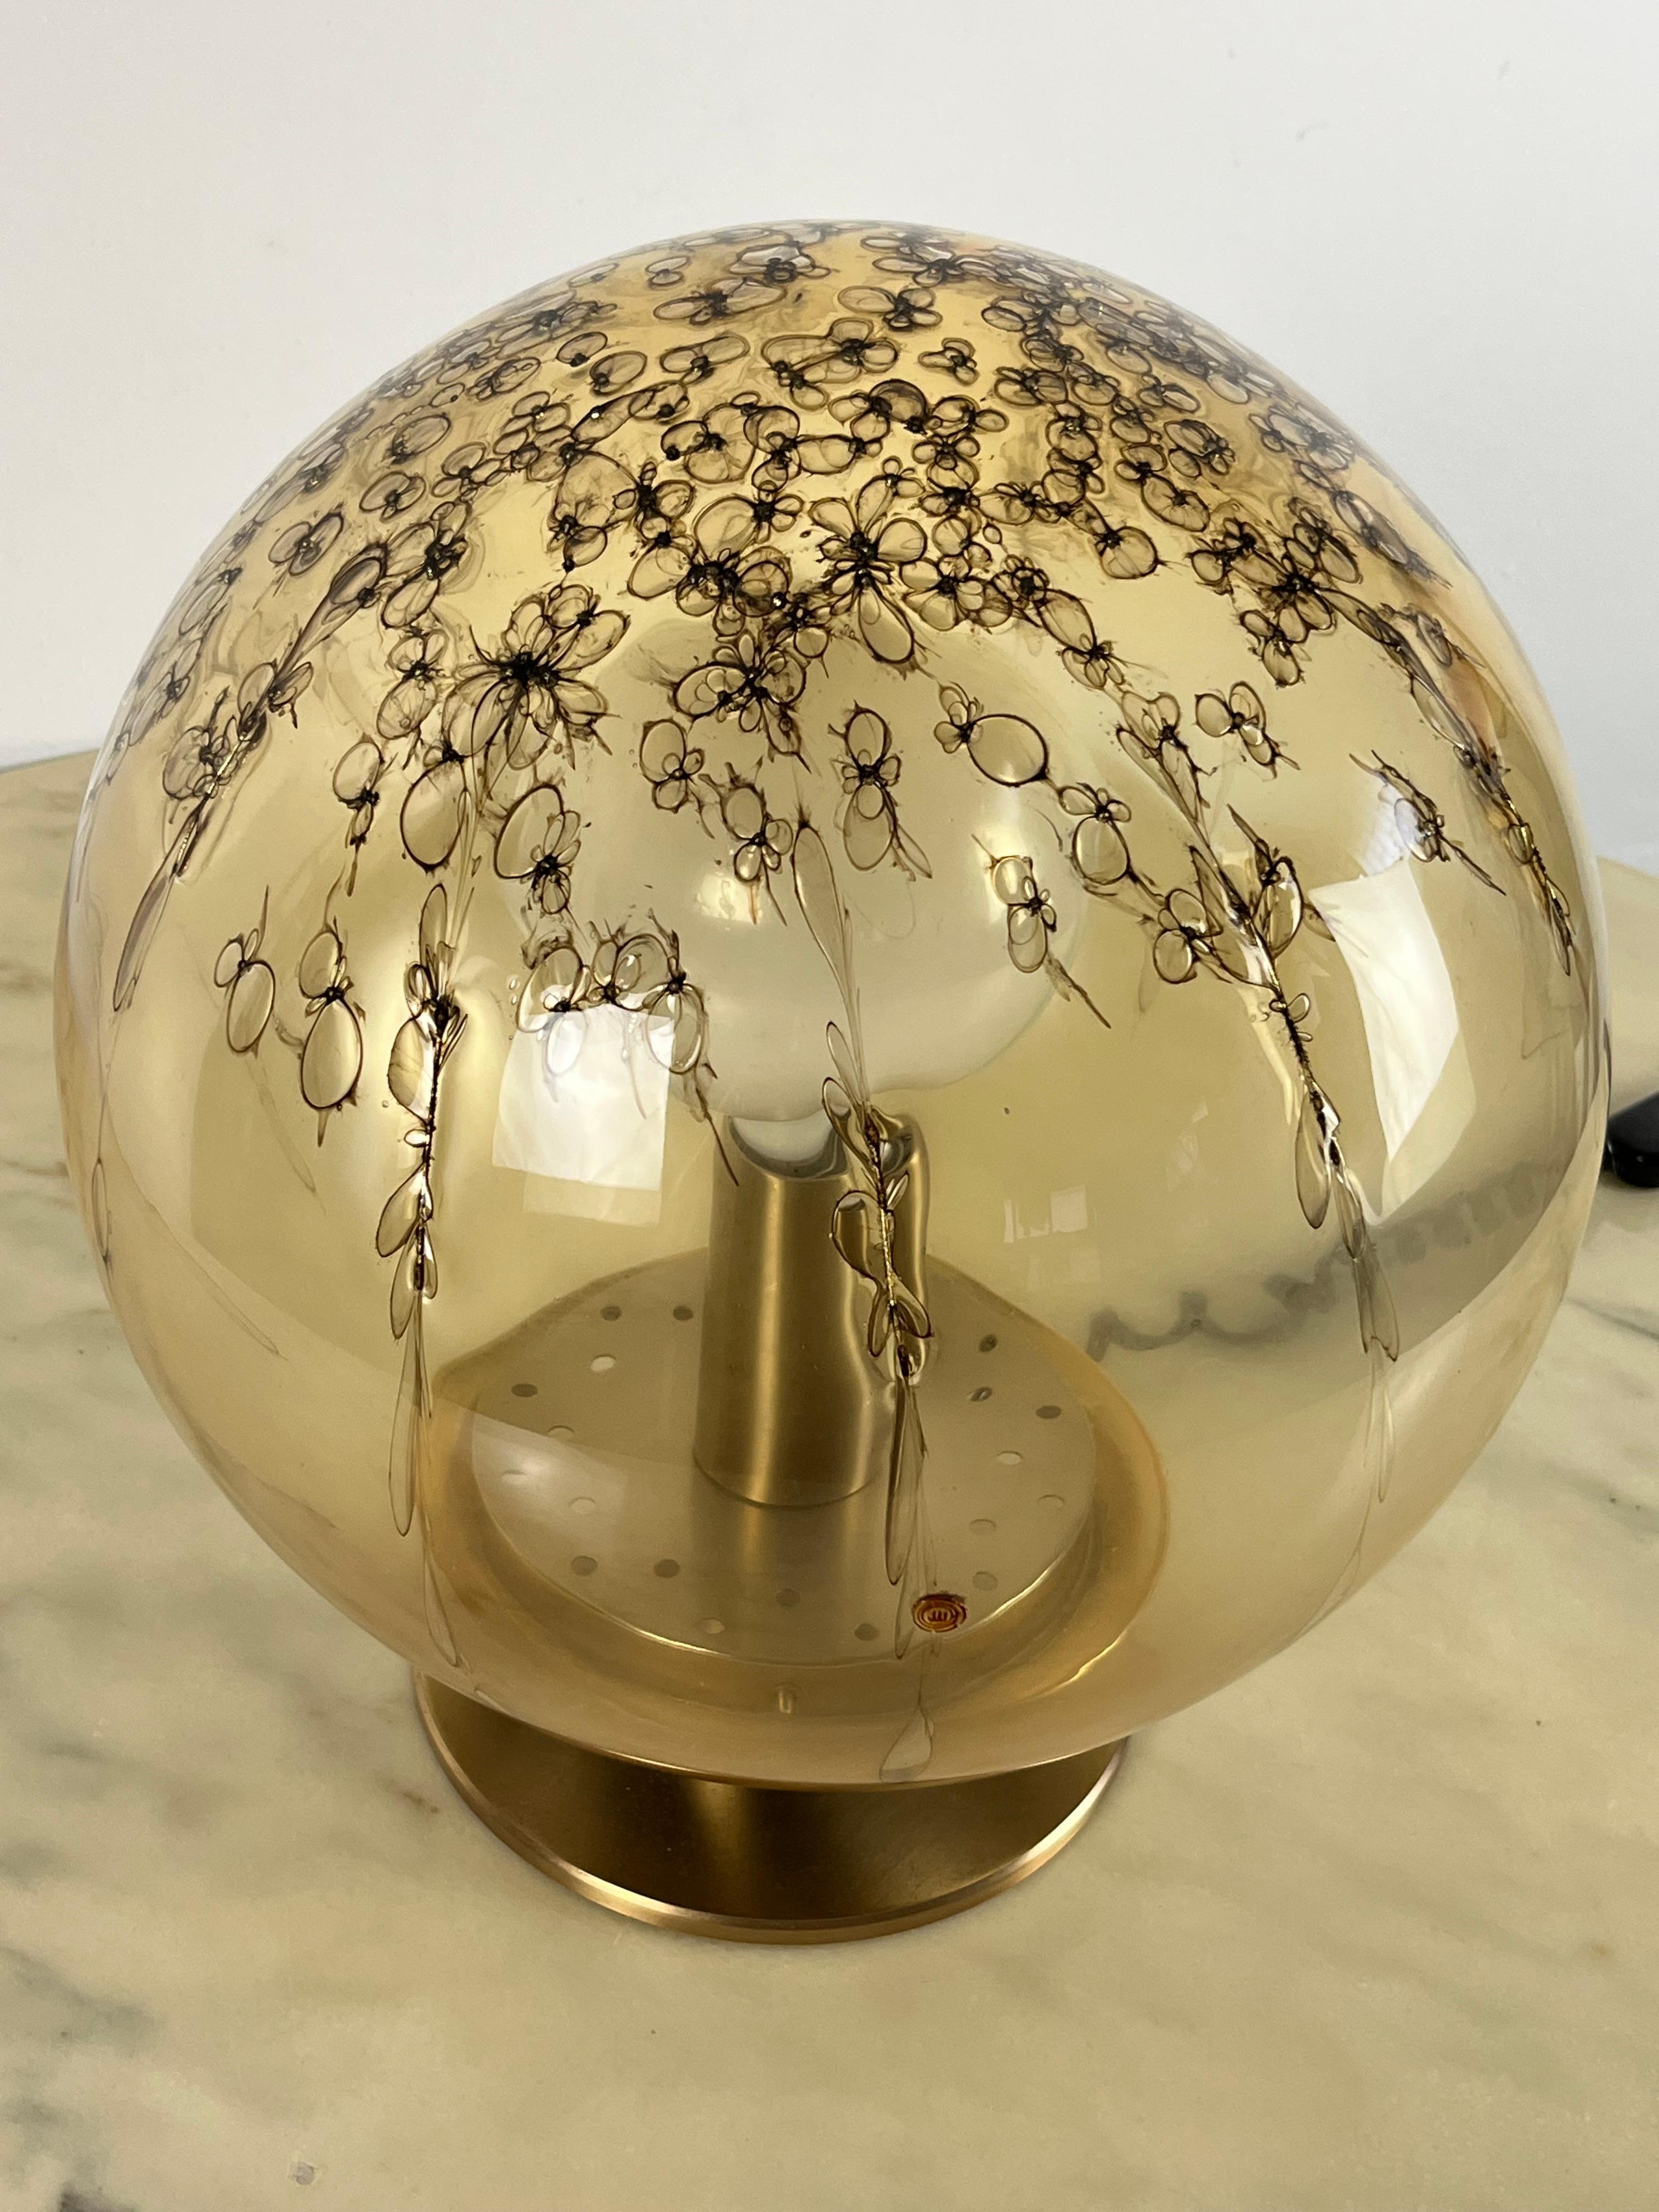 Vintage La Murrina Table Lamp, Murano glass and brass, Italy, 1968 For Sale 2